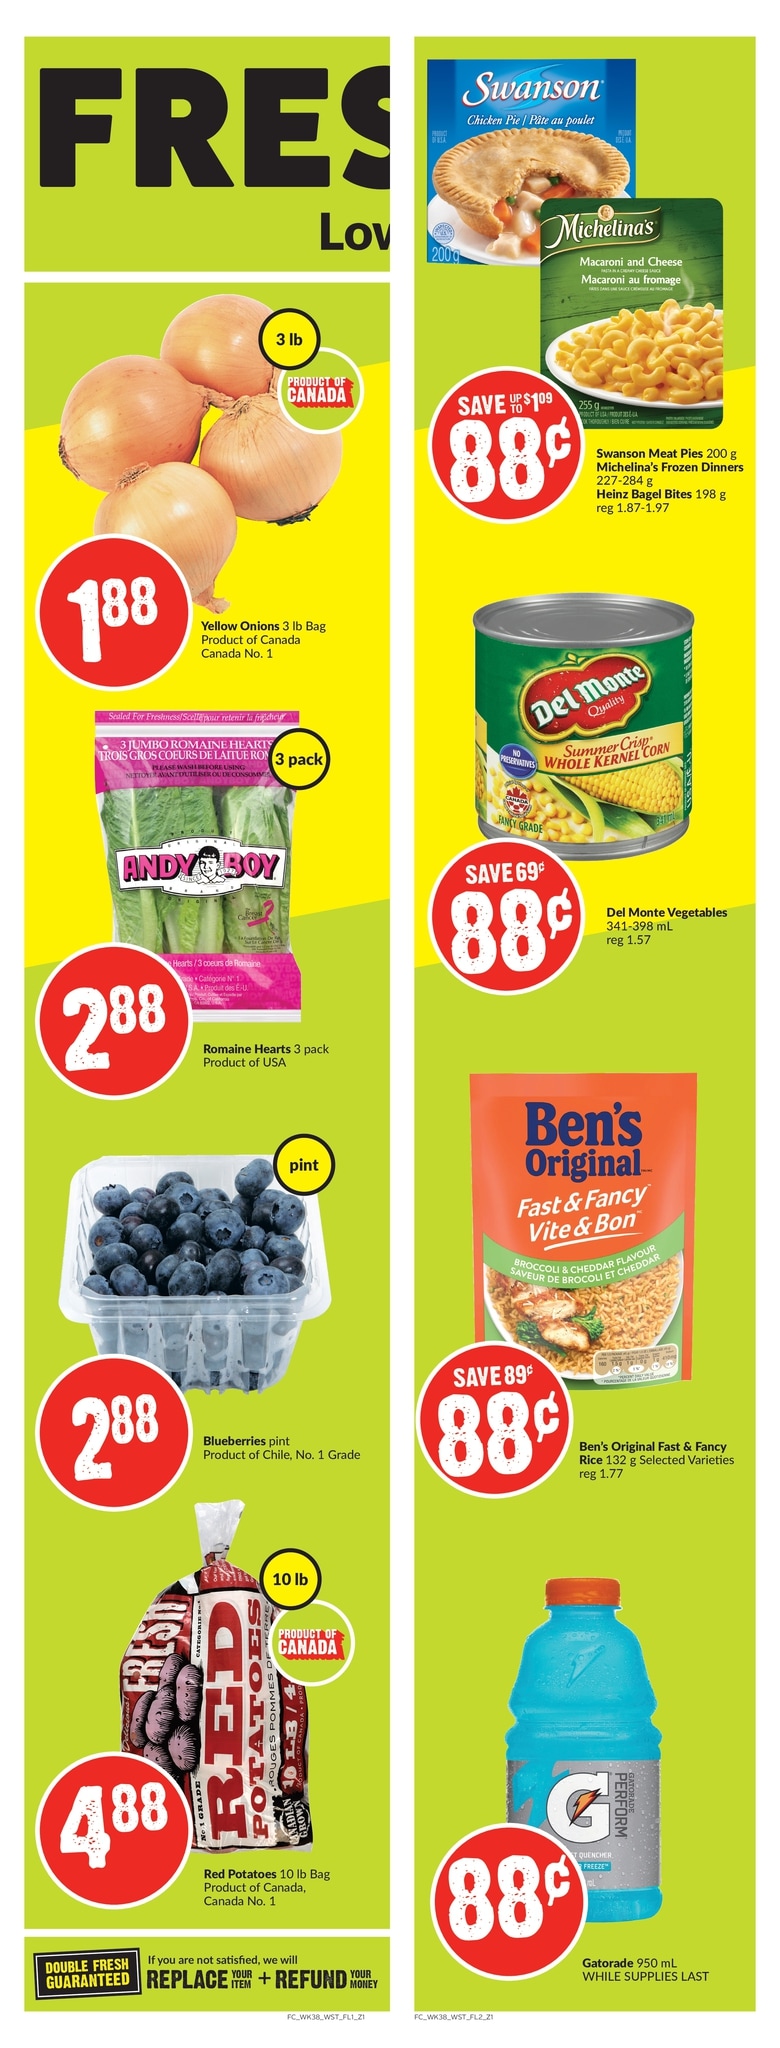 FreshCo British Columbia - Weekly Flyer Specials - Page 1